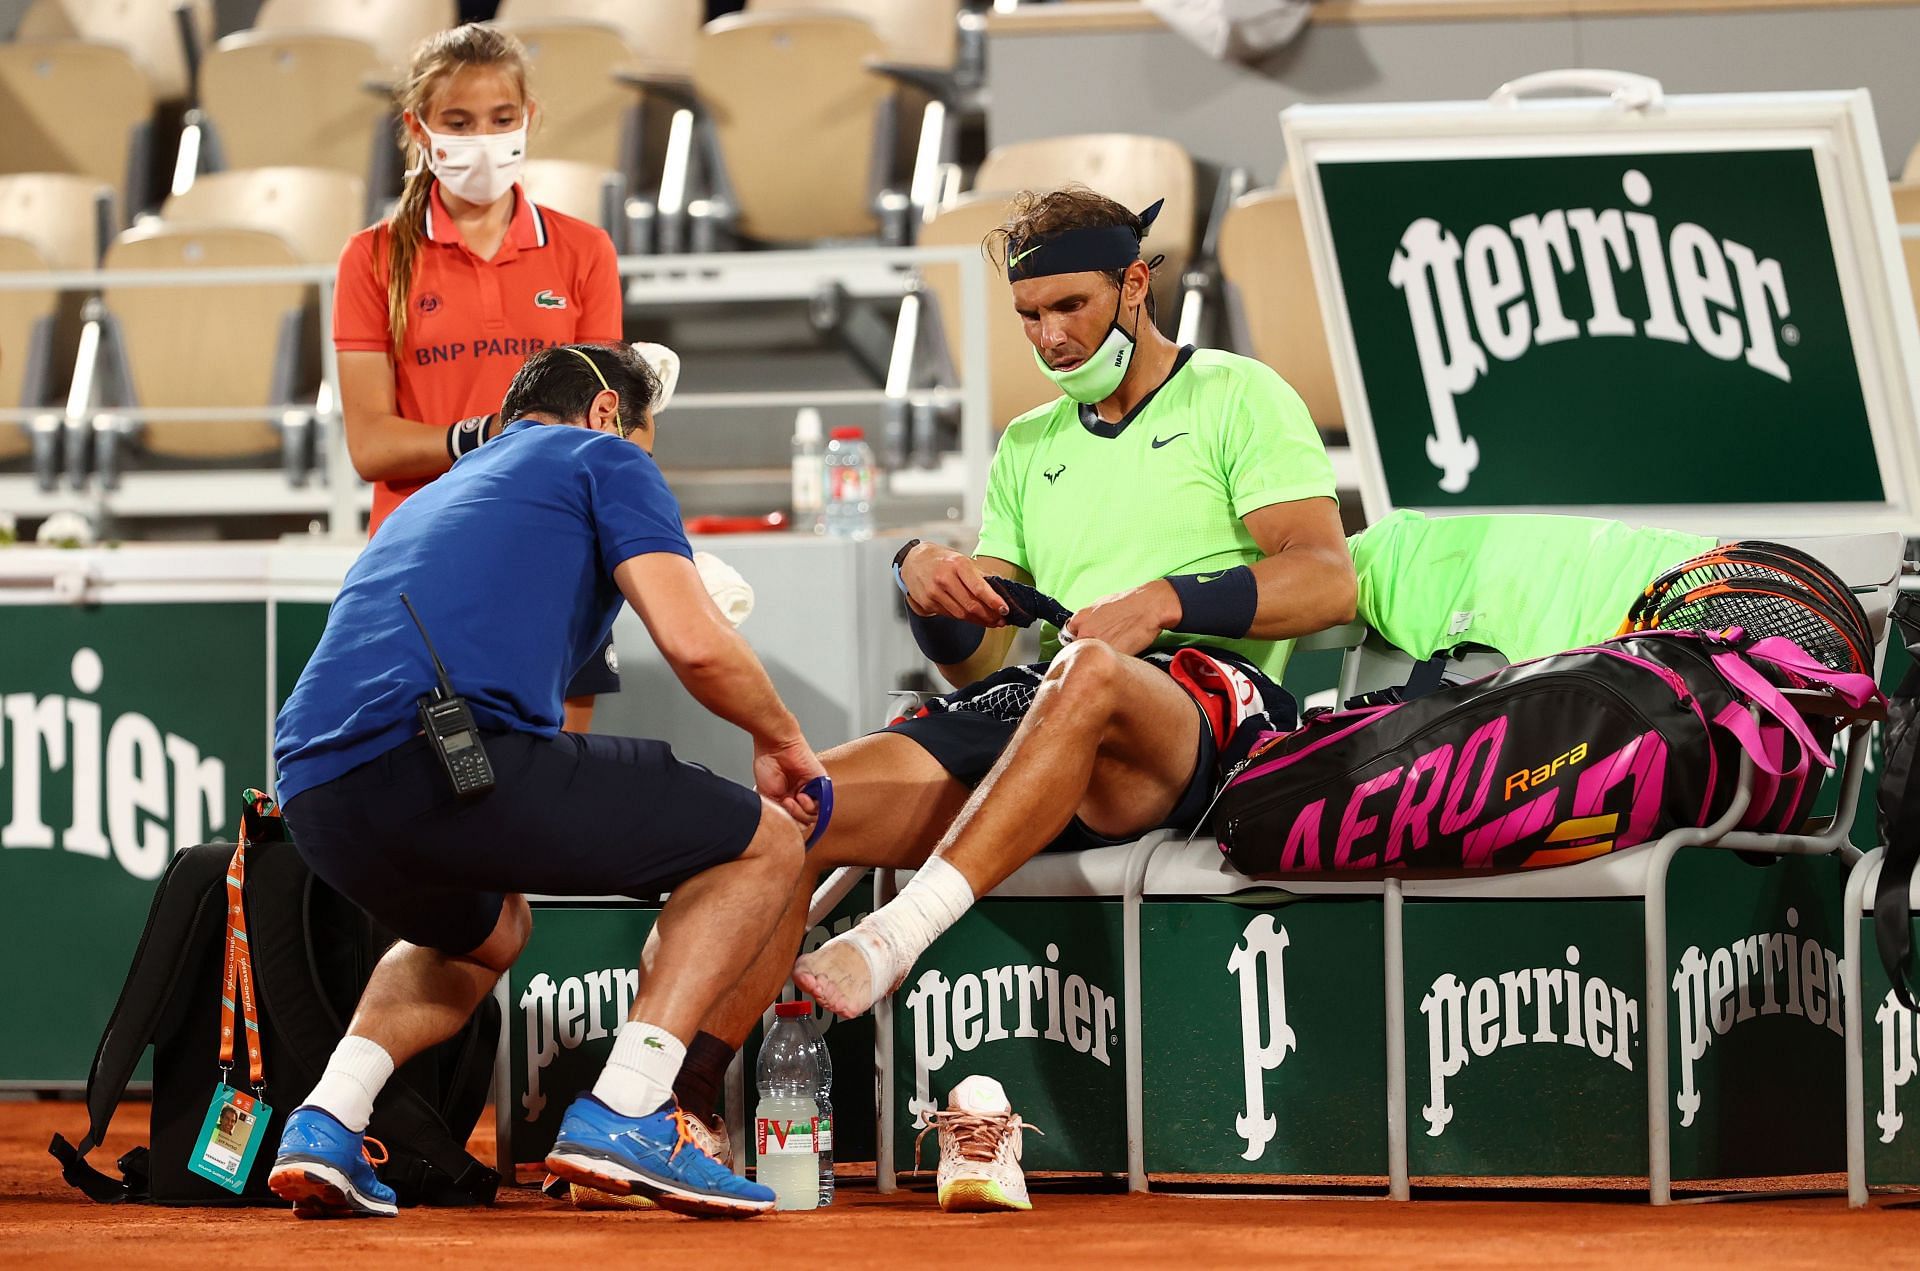 Rafael Nadal getting treatment for his foot at the 2021 French Open